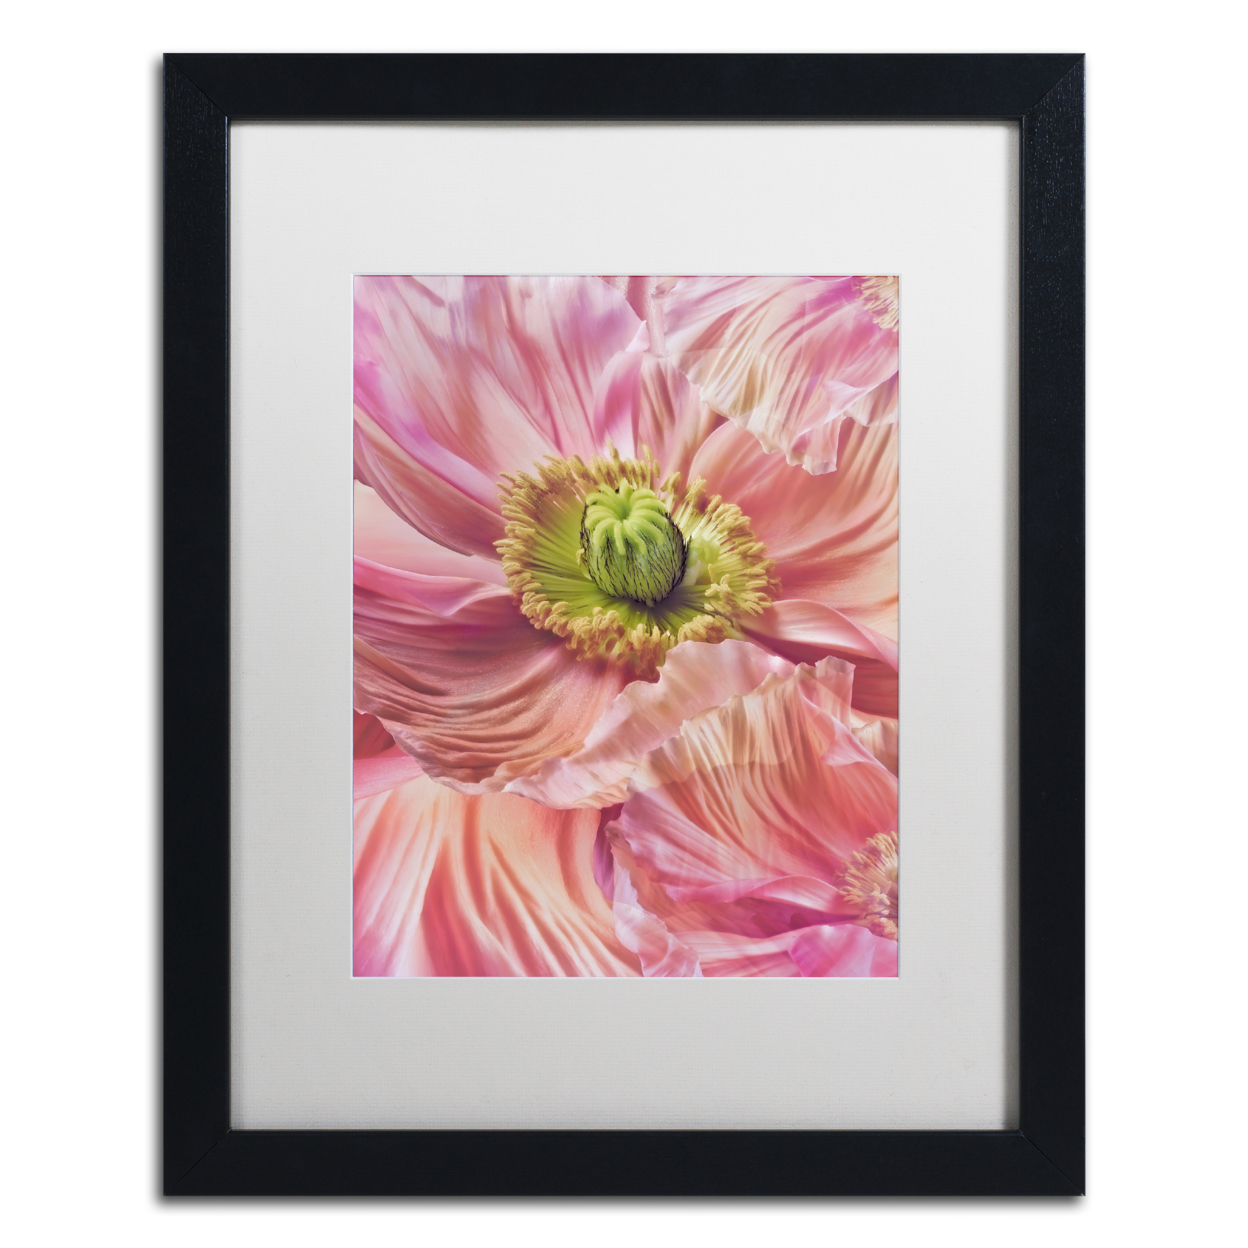 Cora Niele 'Cerise Pink Poppy' Black Wooden Framed Art 18 X 22 Inches